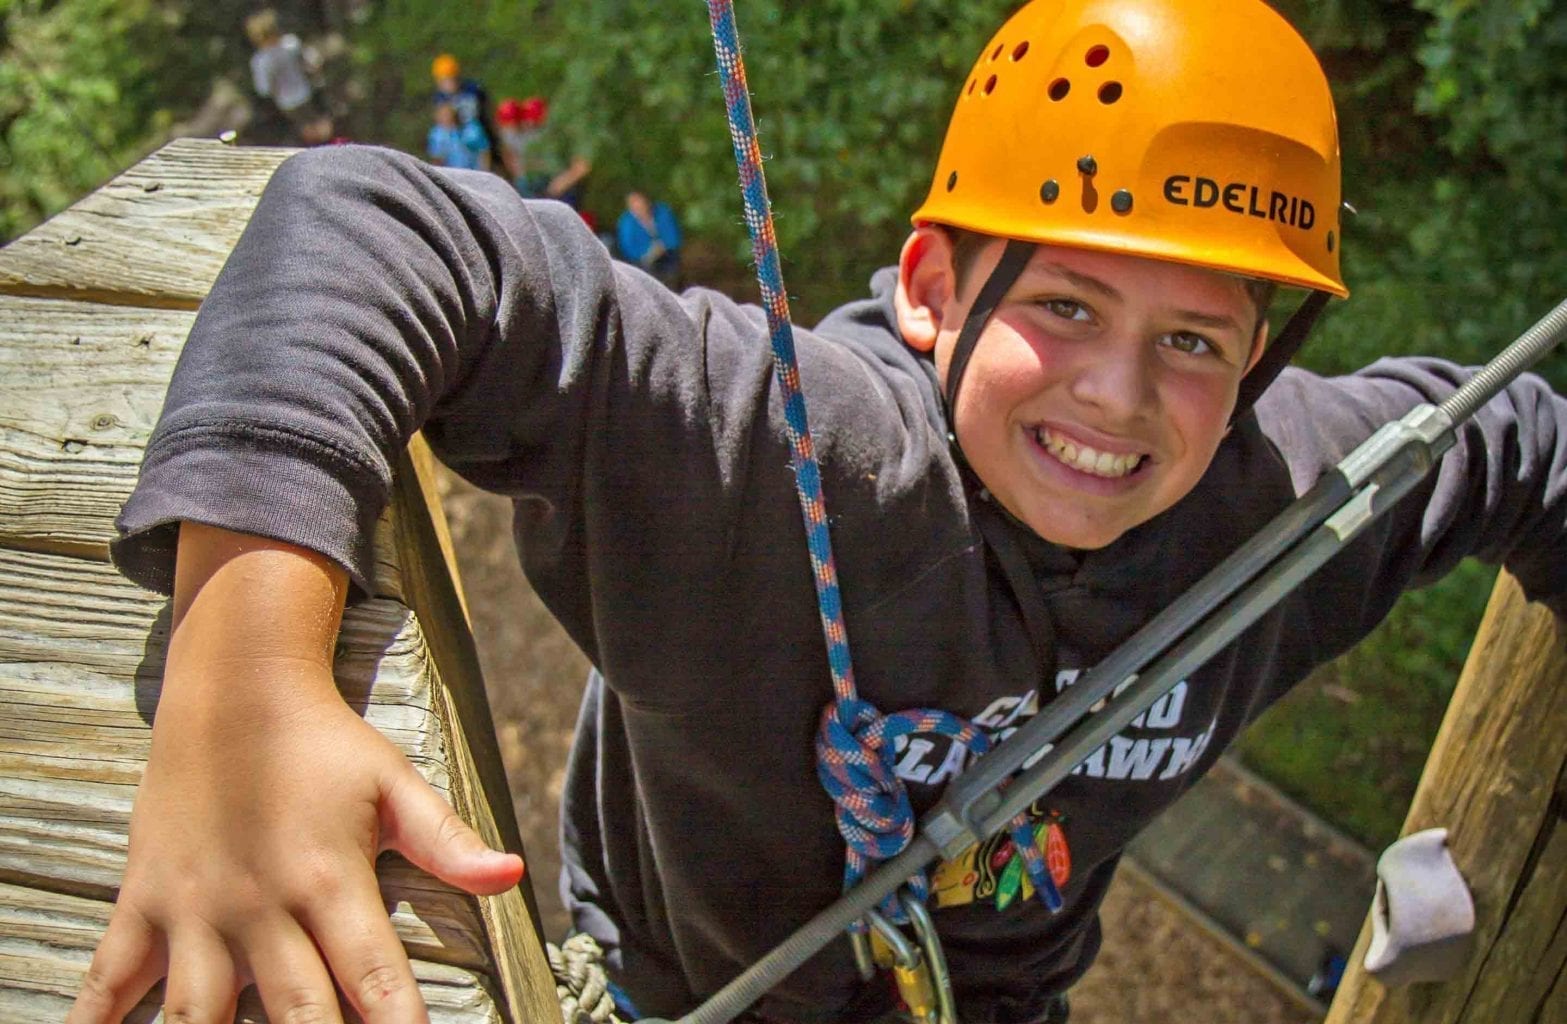 A kid smiles and makes his way up the climbing tower on the Team Challenge Course at ACE Adventure Resort in Southern West Virginia.